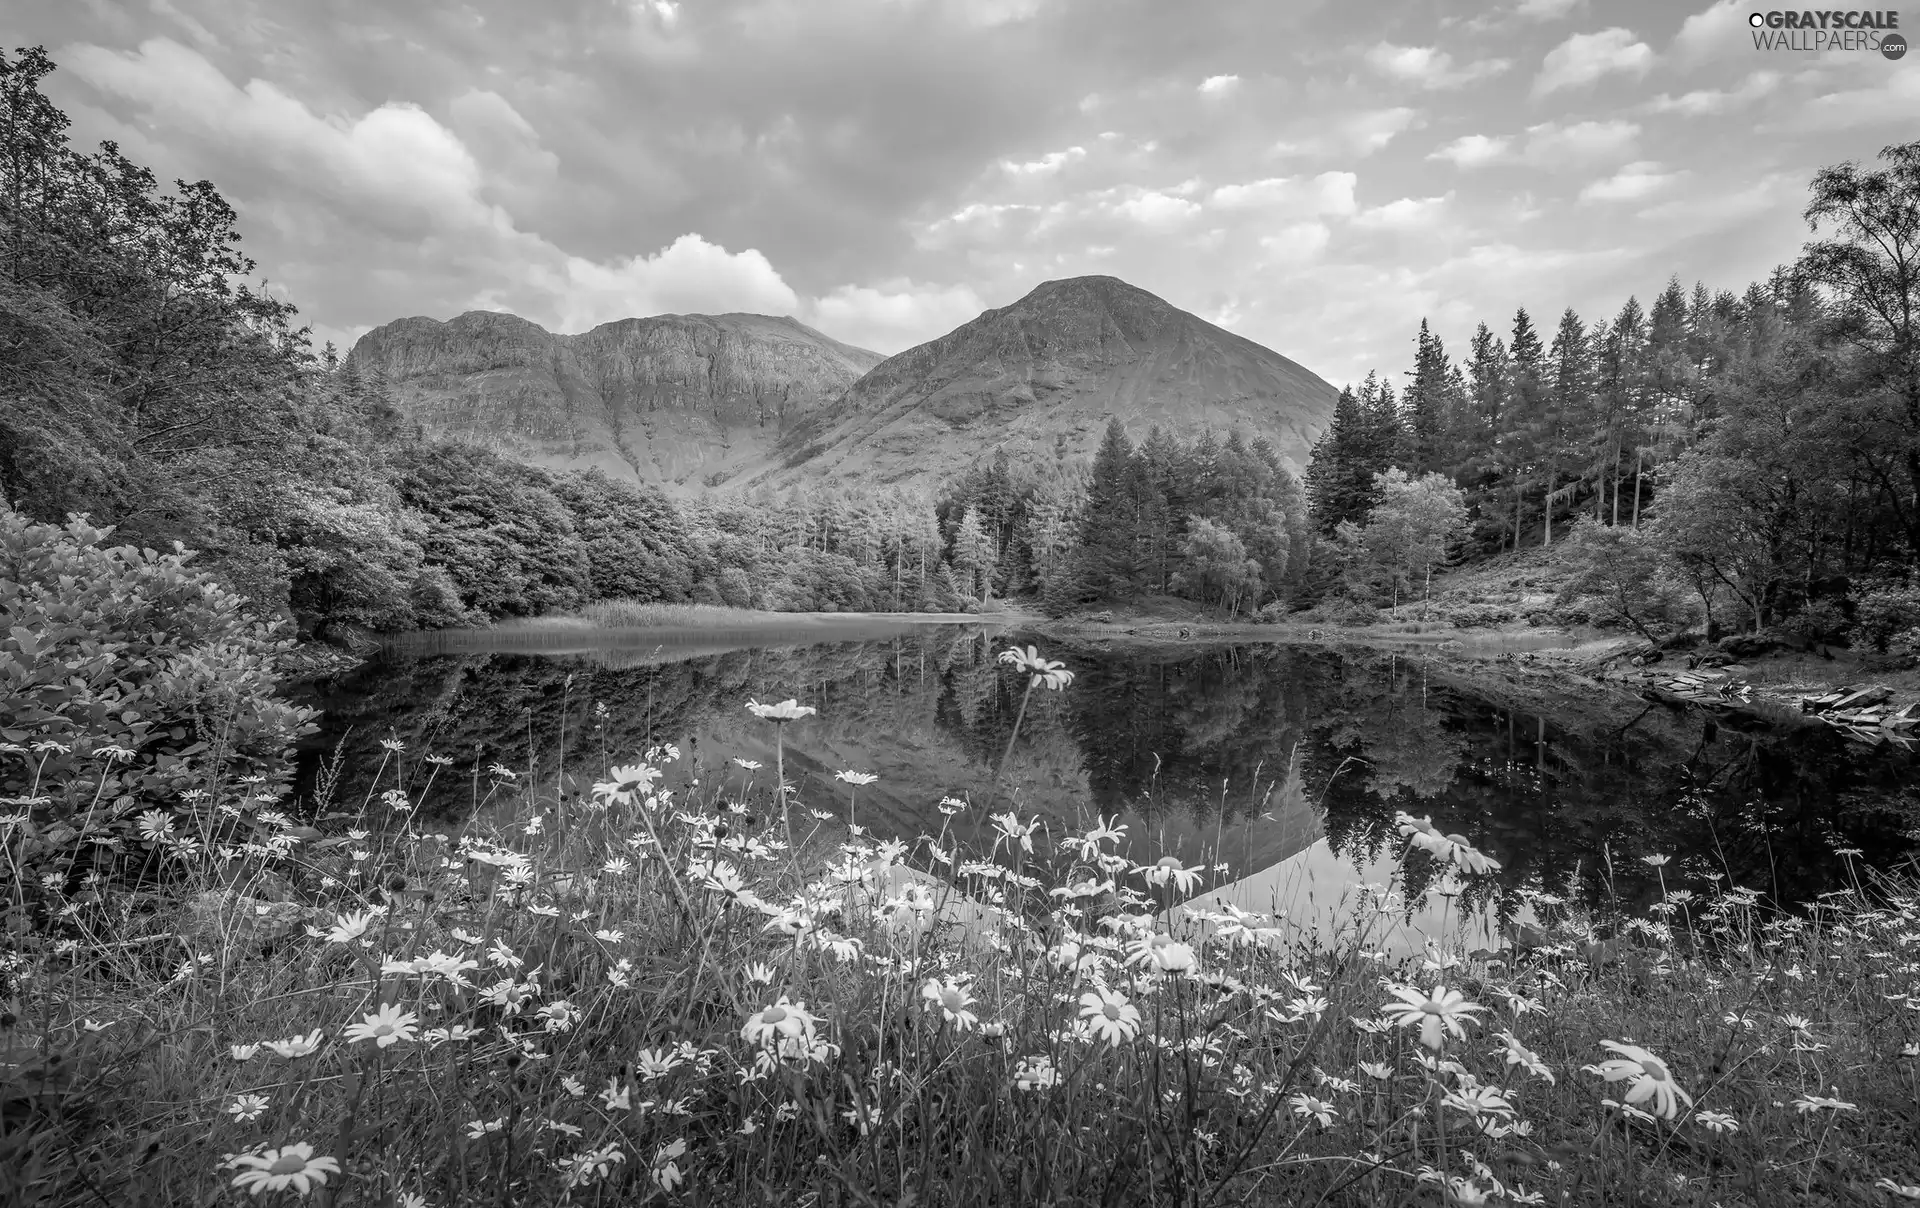 Mountains, forest, viewes, reflection, Flowers, Meadow, trees, summer, clouds, lake